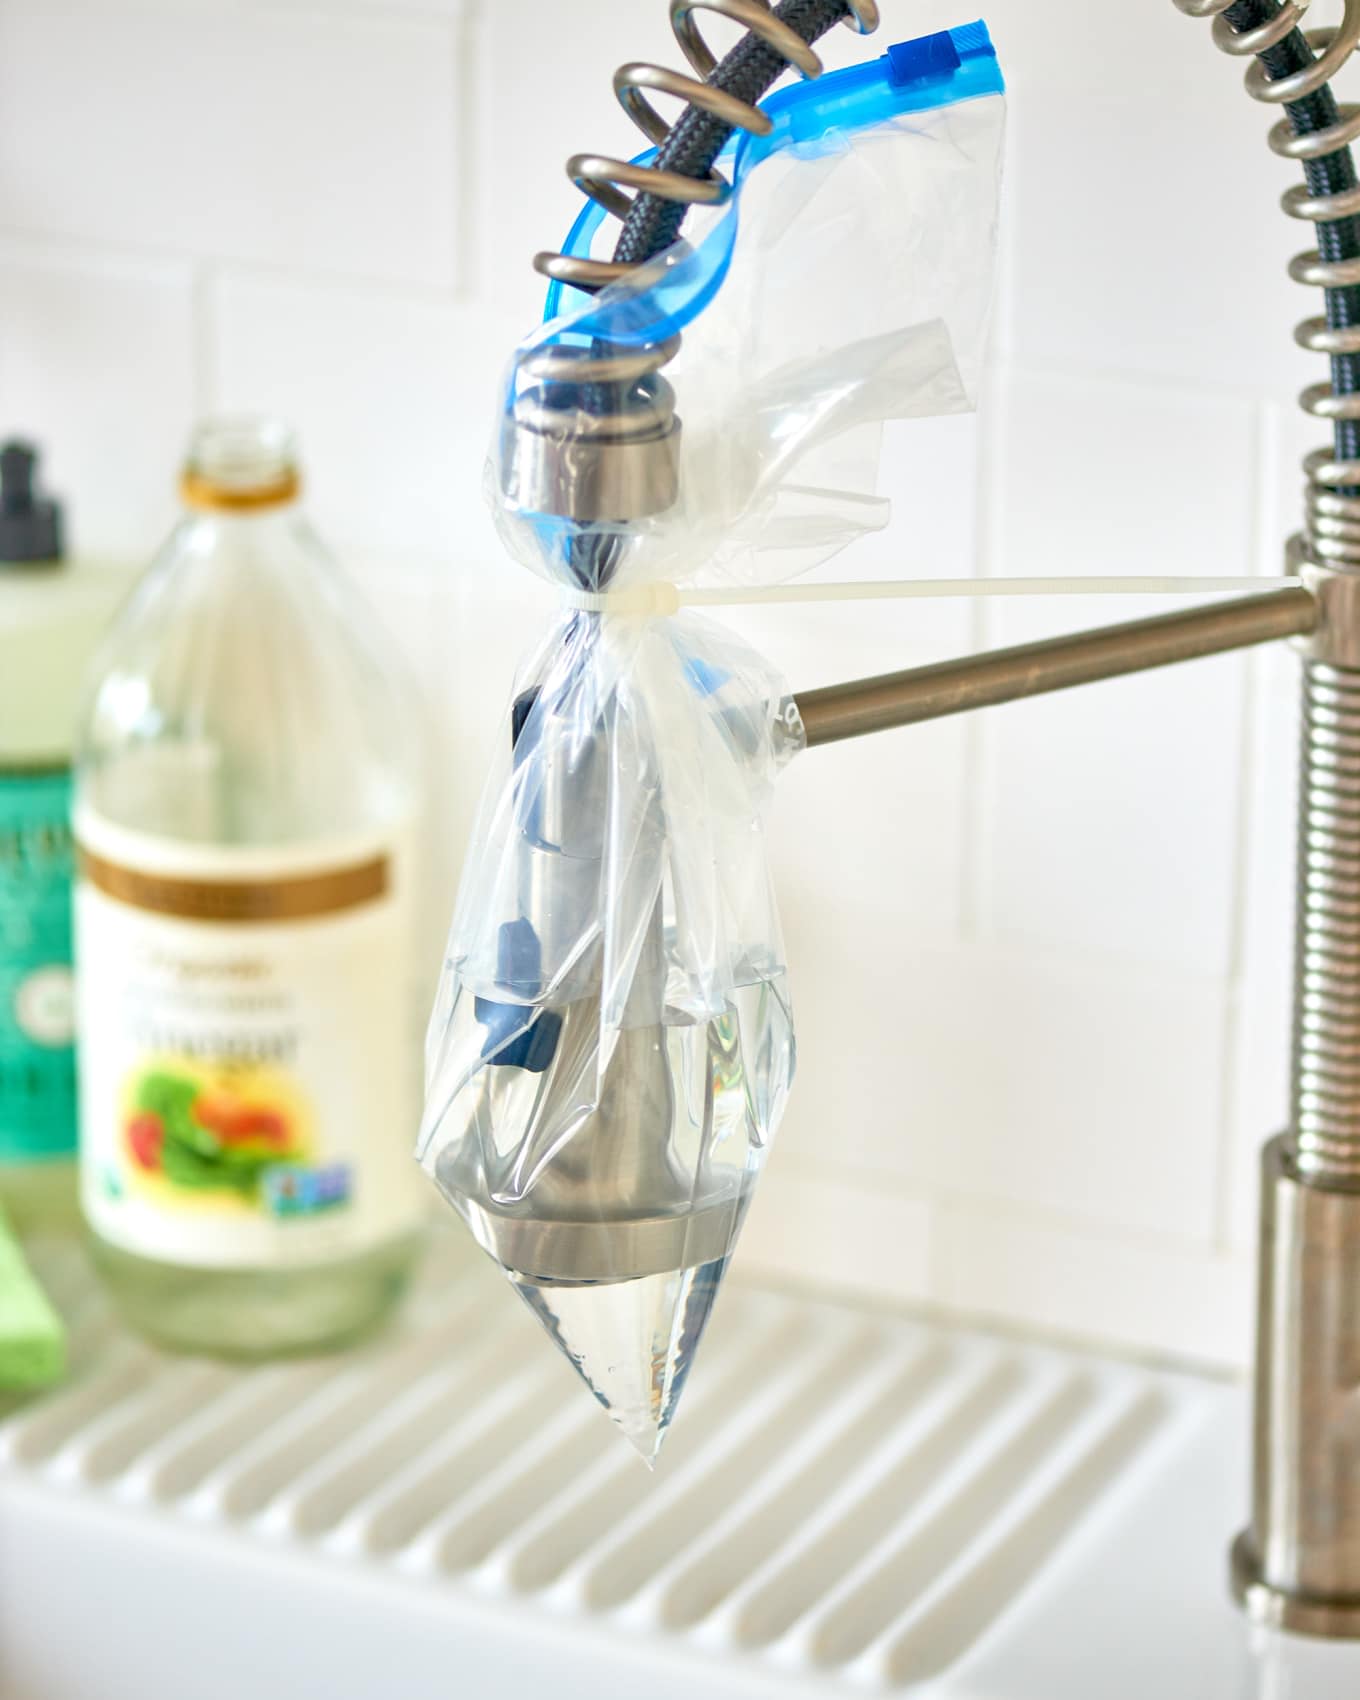 How to Clean Kitchen Faucets with vinegar?